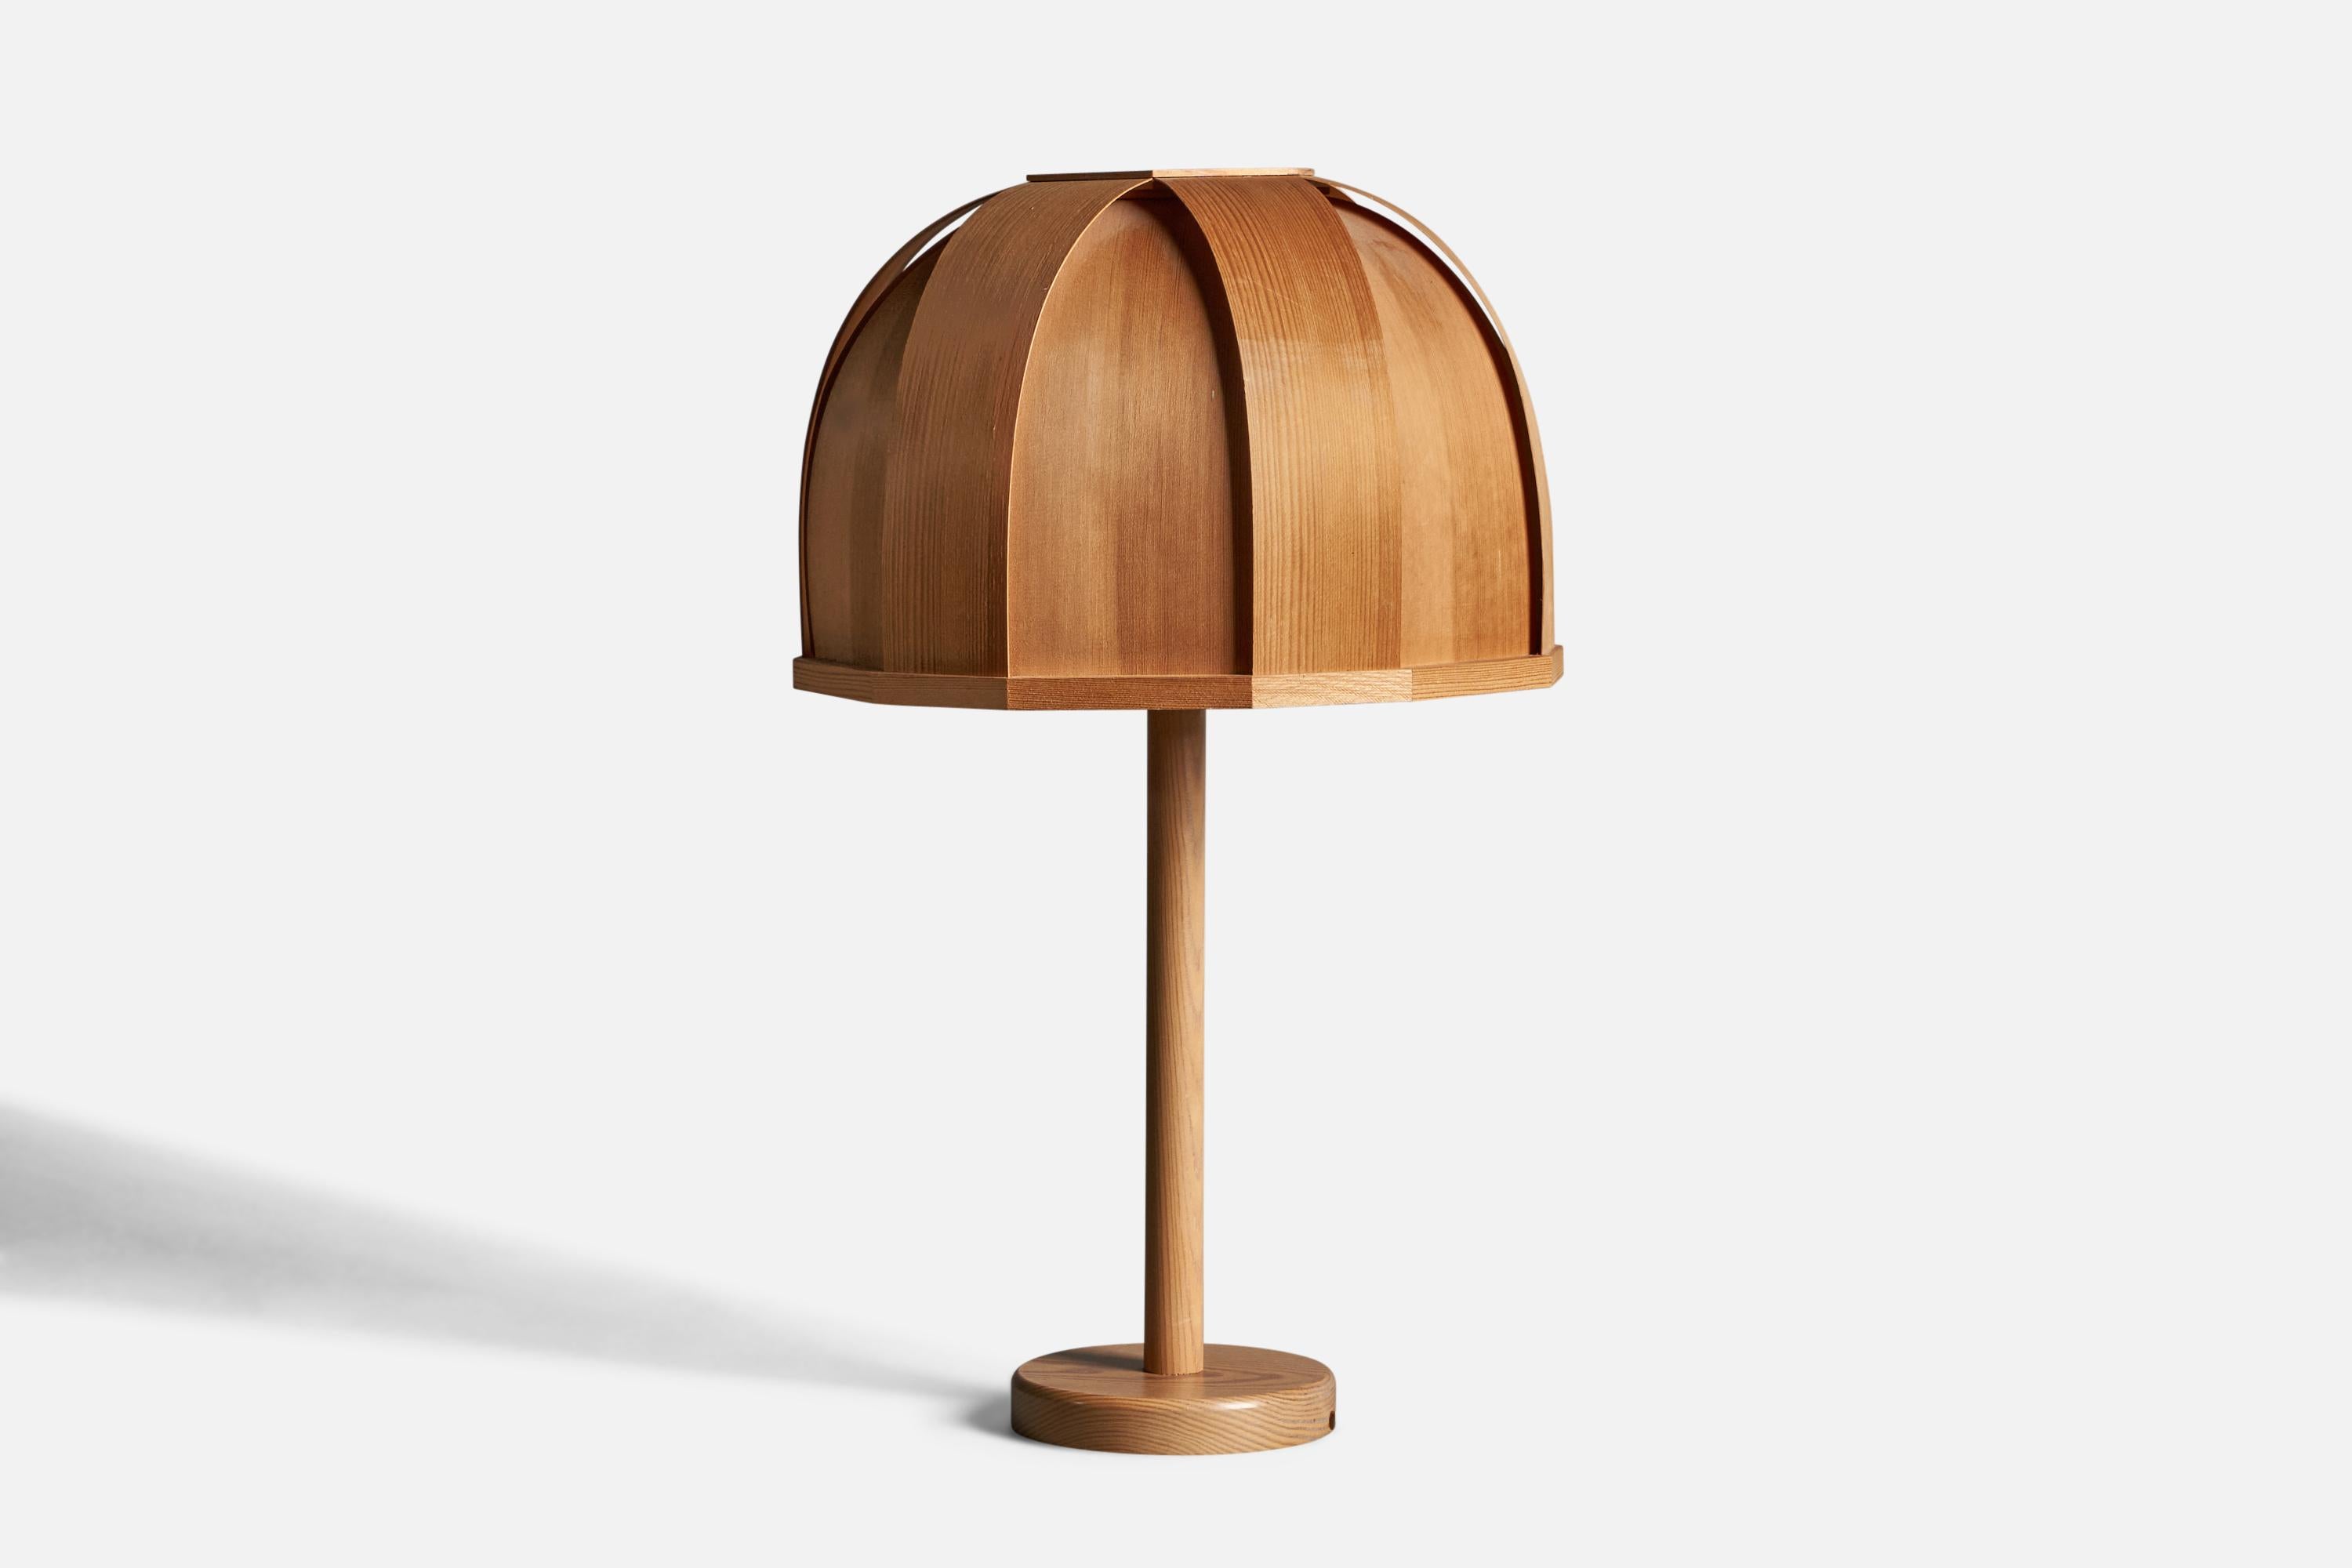 A pine and moulded pine veneer table lamp, designed and produced by Solbackens Svarveri, Sweden, c. 1970s.

Overall Dimensions (inches): 22.75